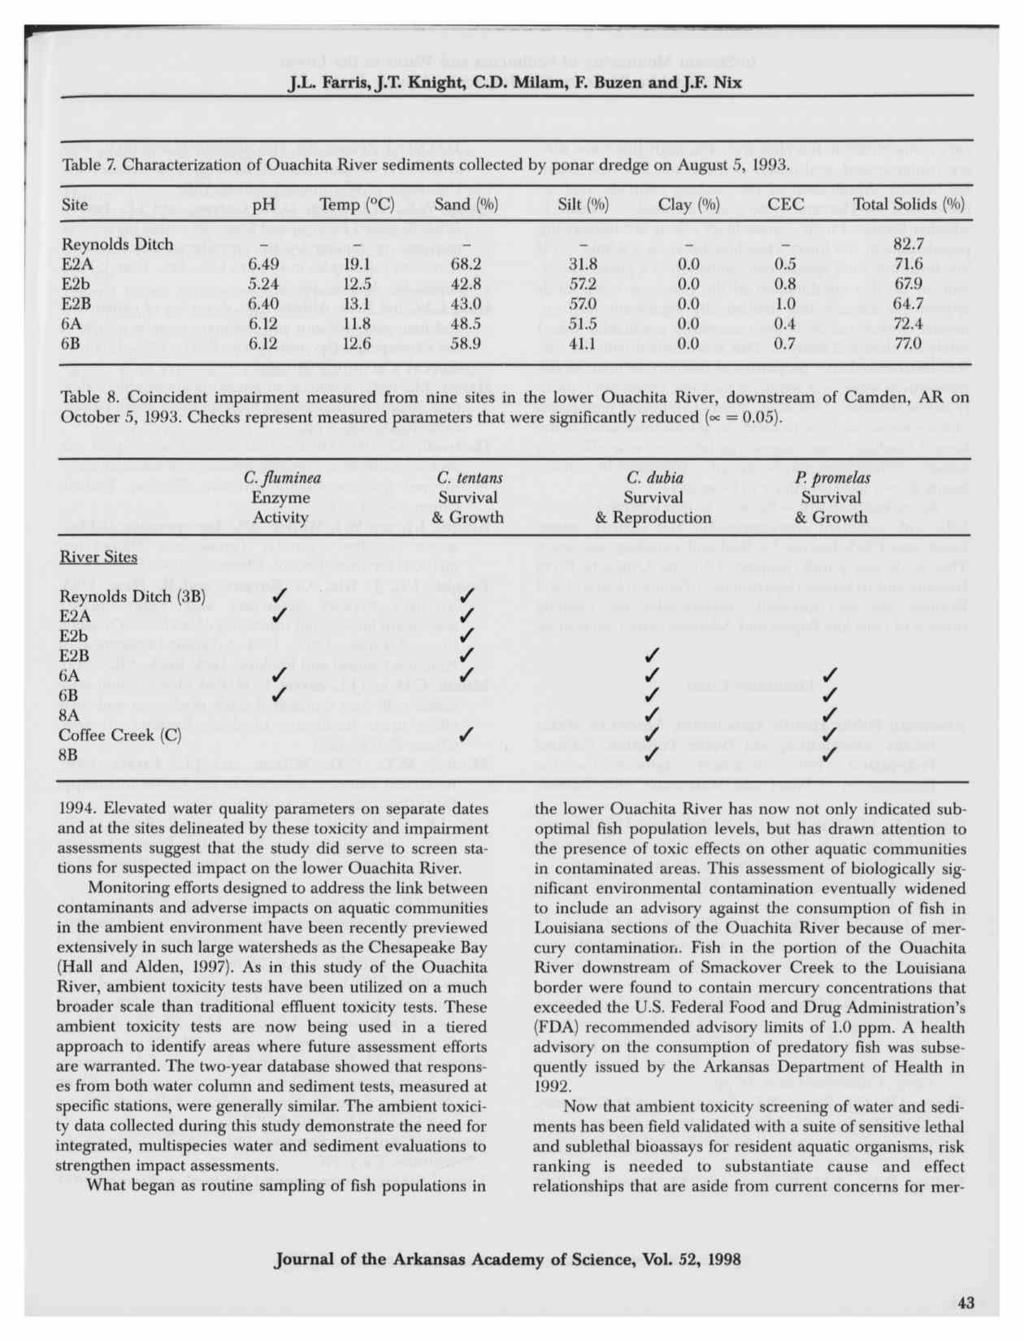 43 J.L. Farris, J.T. Knight, CD.Milam,F. Buzen and J.F. Nix? Table 7. Characterization of Ouachita River sediments collected by ponar dredge on August 5, 1993.